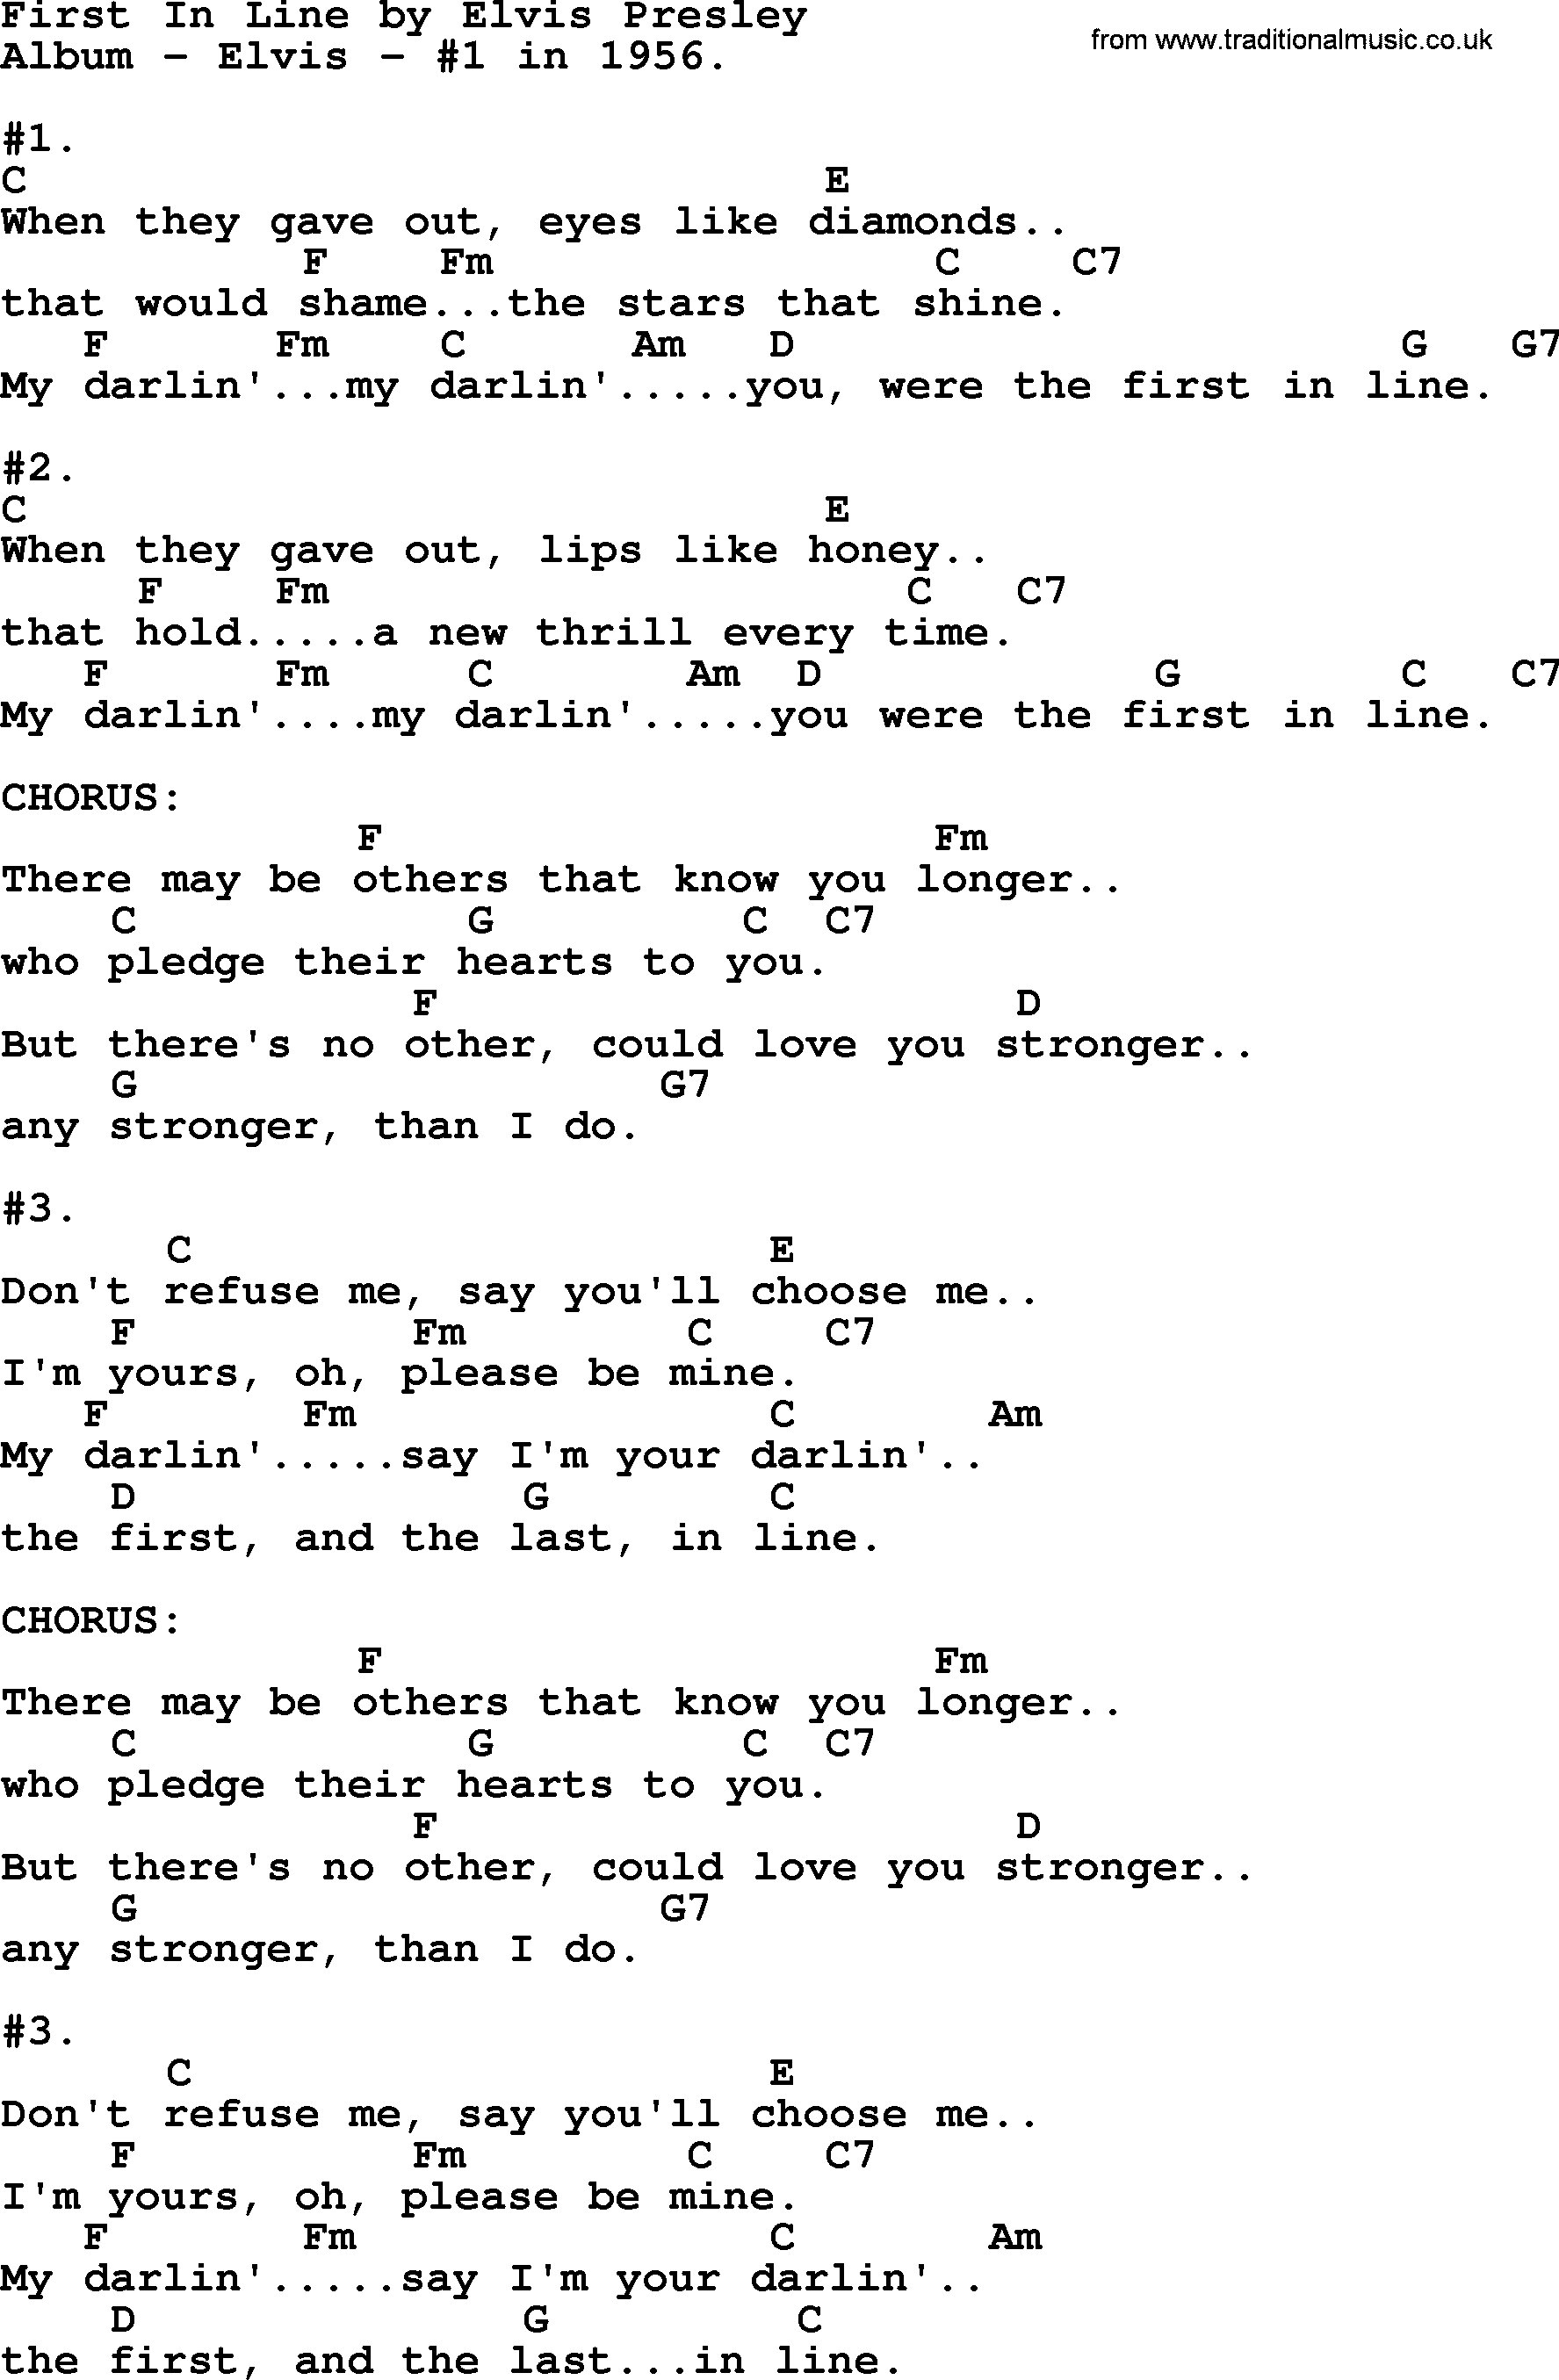 Elvis Presley song: First In Line, lyrics and chords